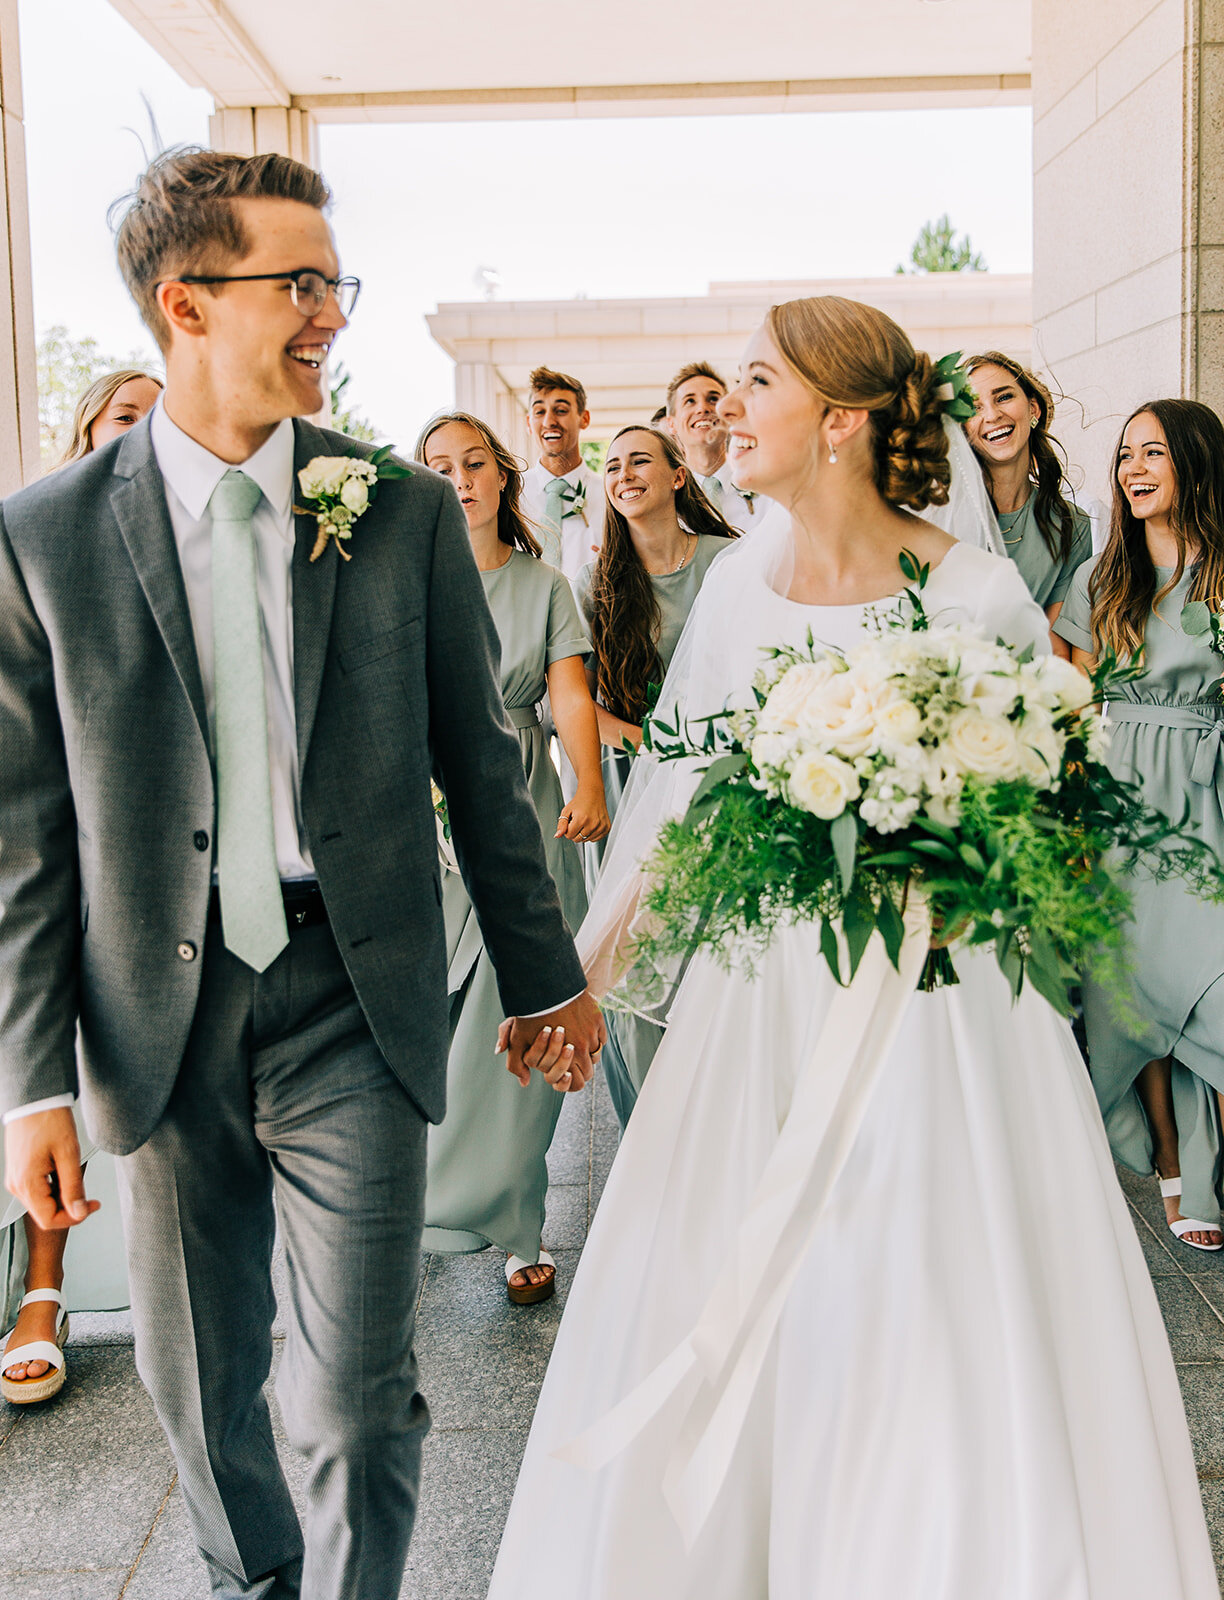  bride and groom looking into each other’s eyes holding hands after their sealing ceremony husband and wife oquirrh mountain temple lds wedding ceremony south jordan utah wedding photographer bella alder photography affordable wedding pictures on a b